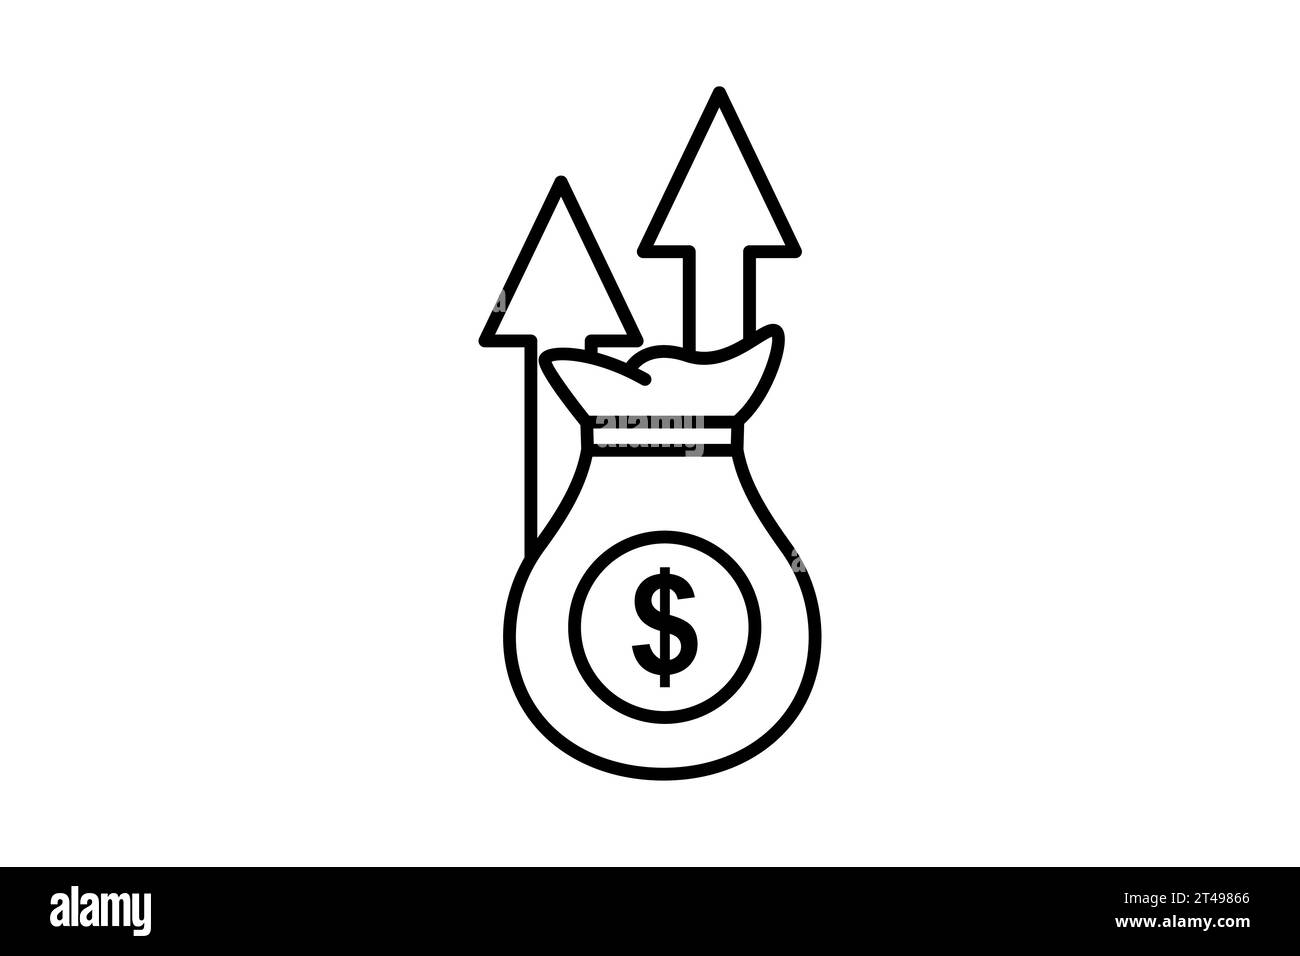 inflation icon. icon related to investments and financial concepts. Line icon style. Simple vector design editable Stock Vector